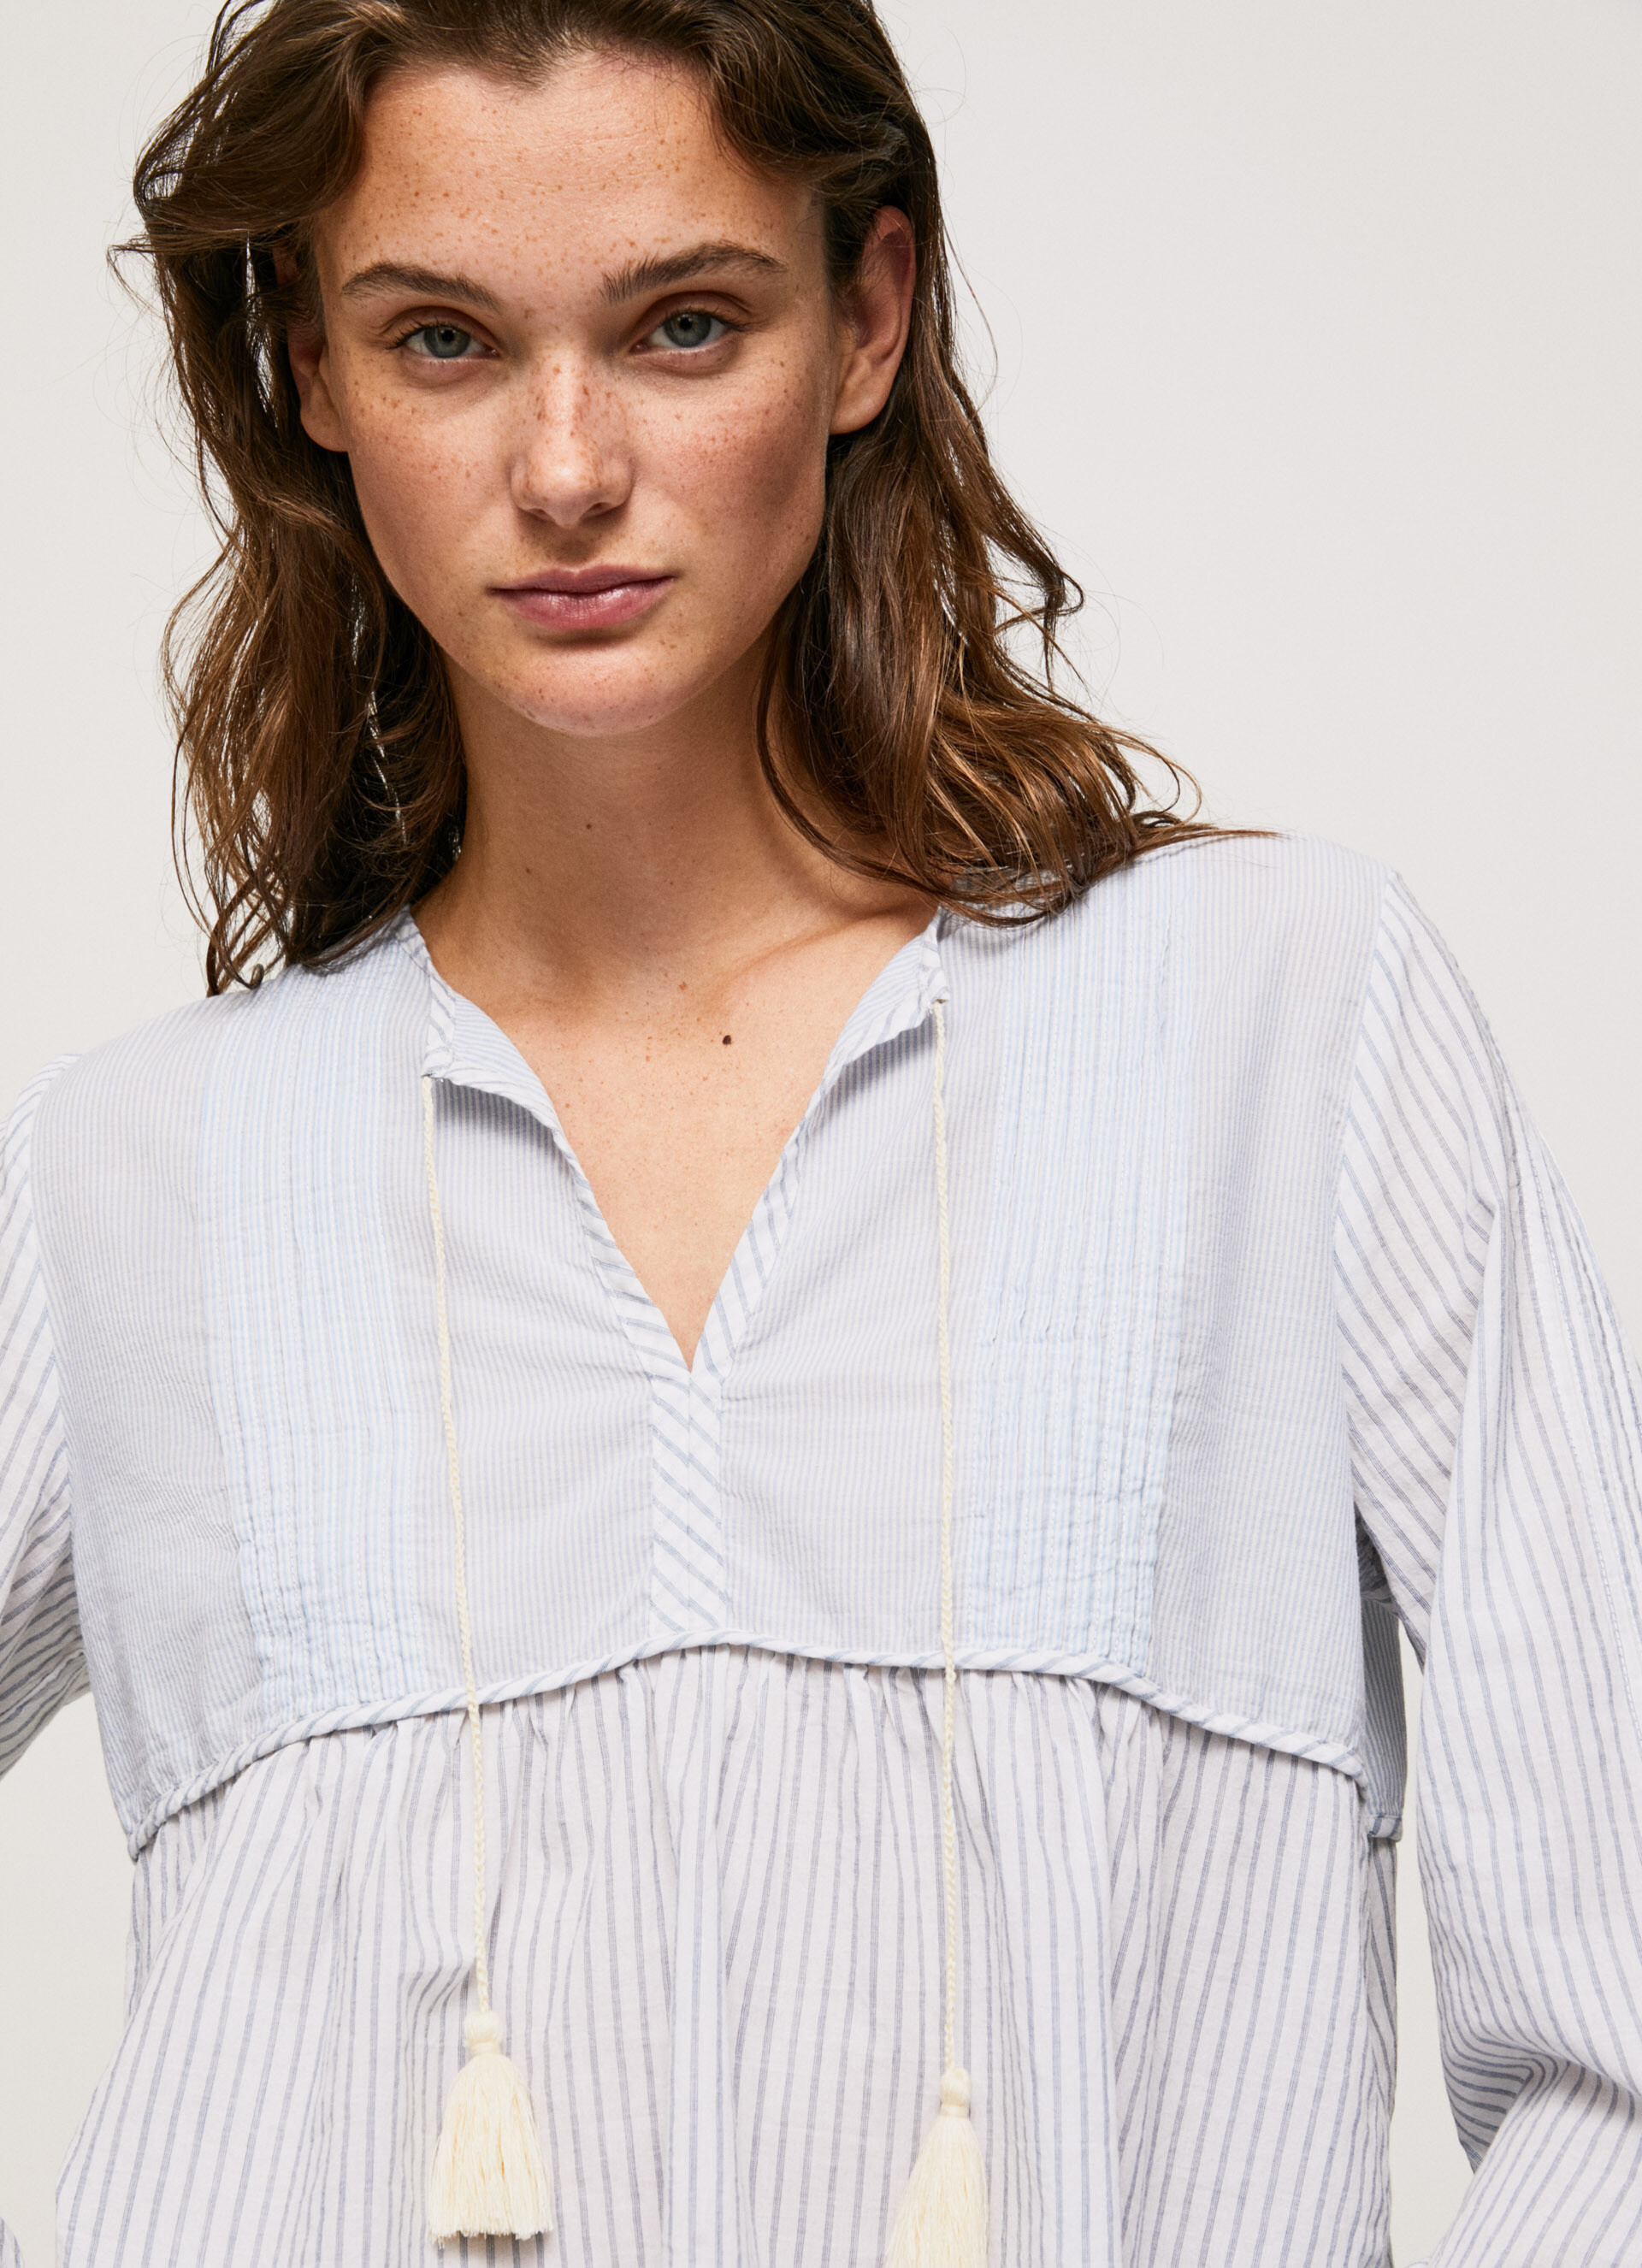 Pepe Jeans - Striped blouse, Light Blue, large image number 2